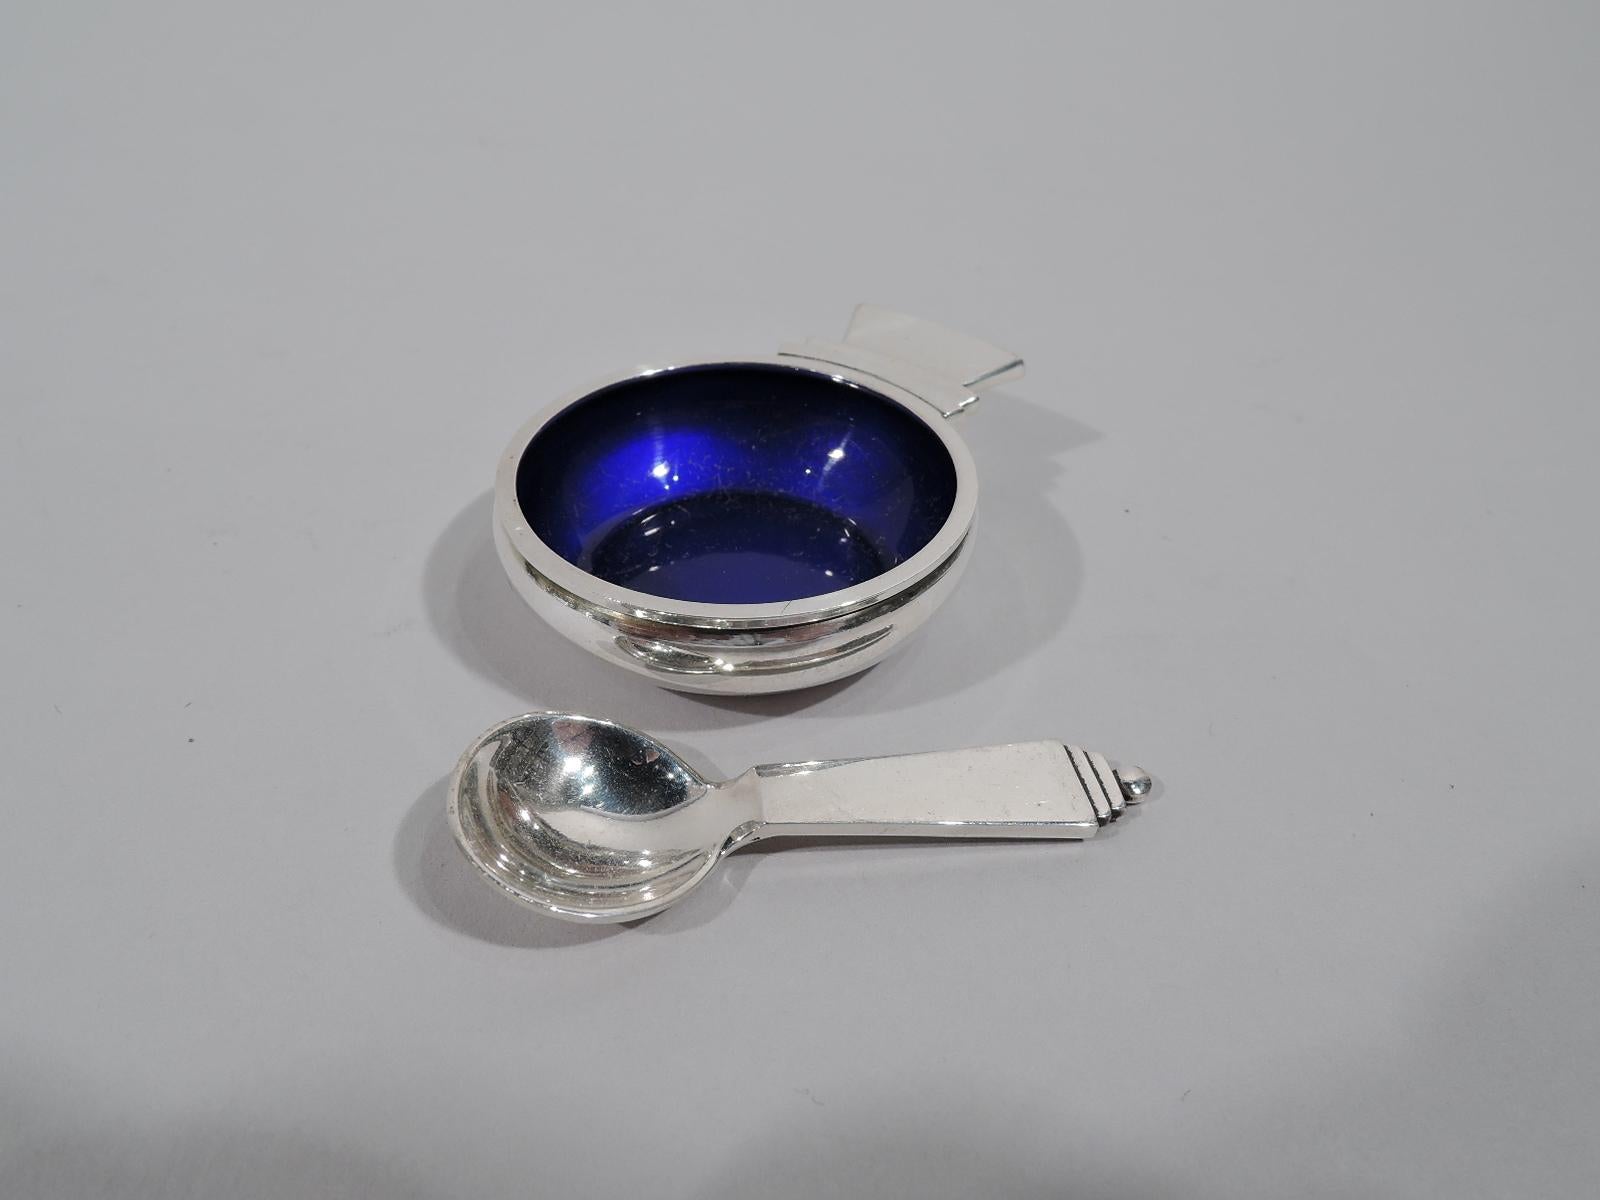 Danish Set of 8 Georg Jensen Pyramid Sterling Silver and Enamel Open Salts and Spoons